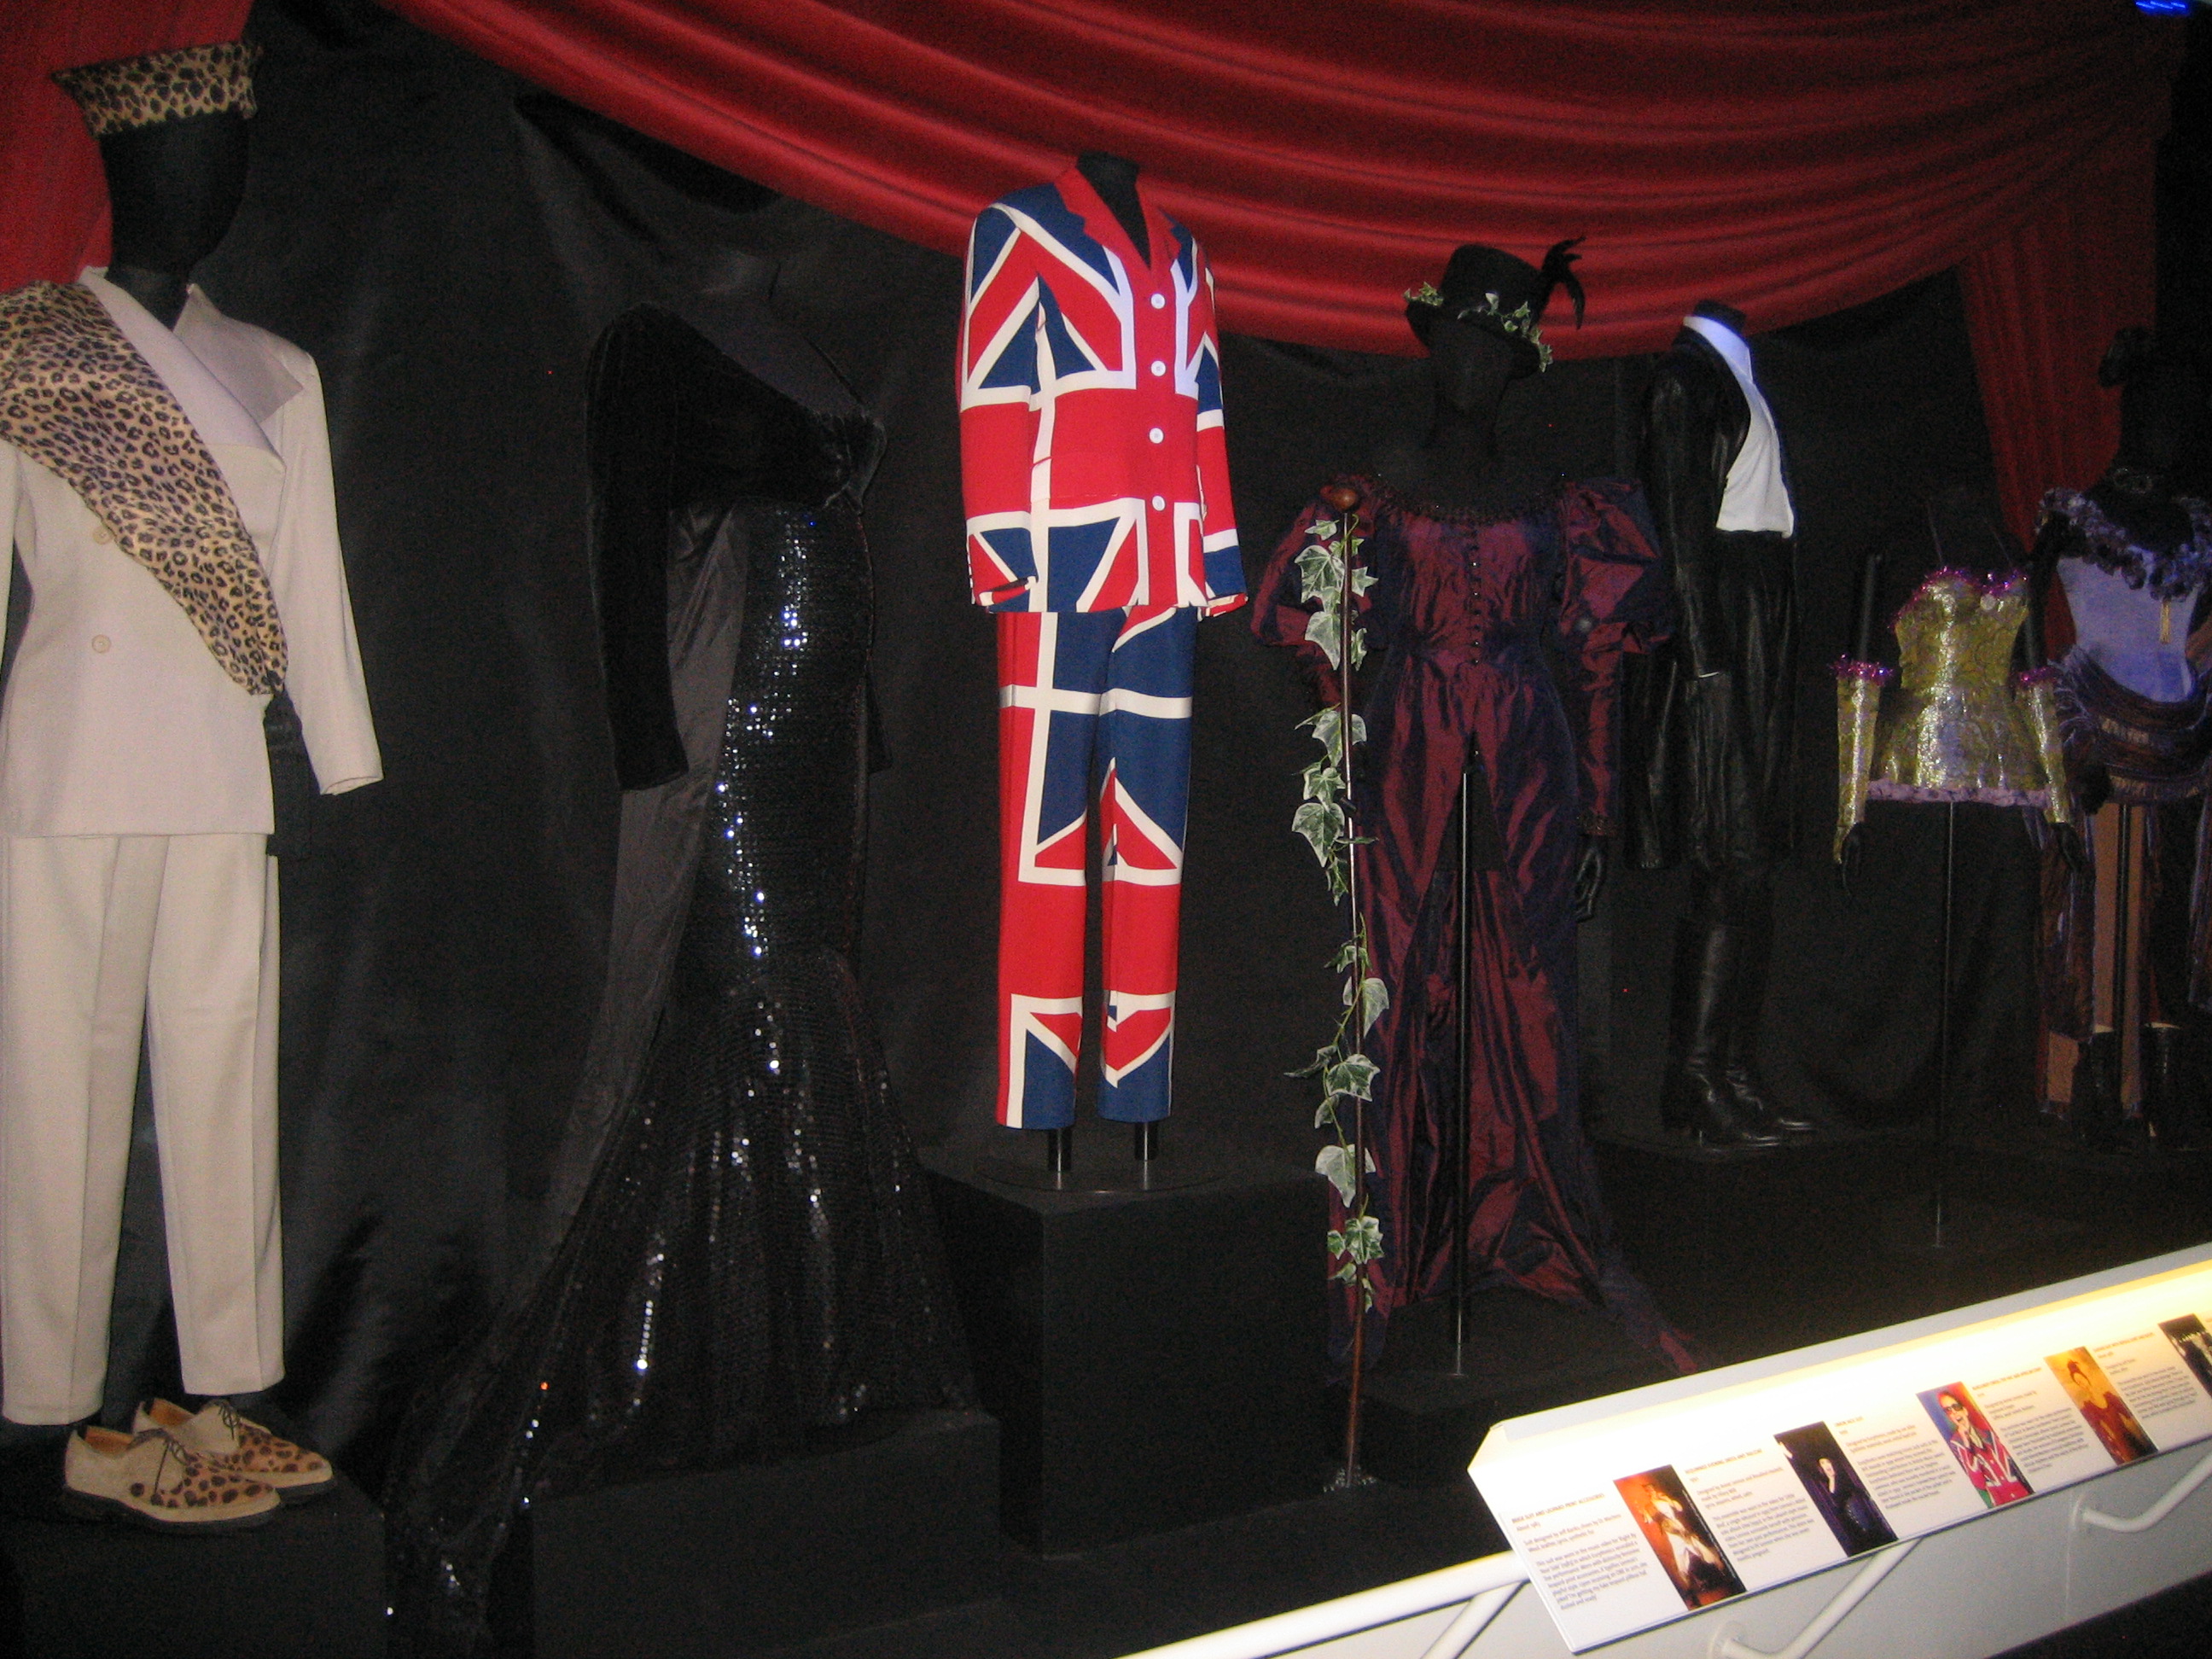  Stage costumes worn by Annie Lennox